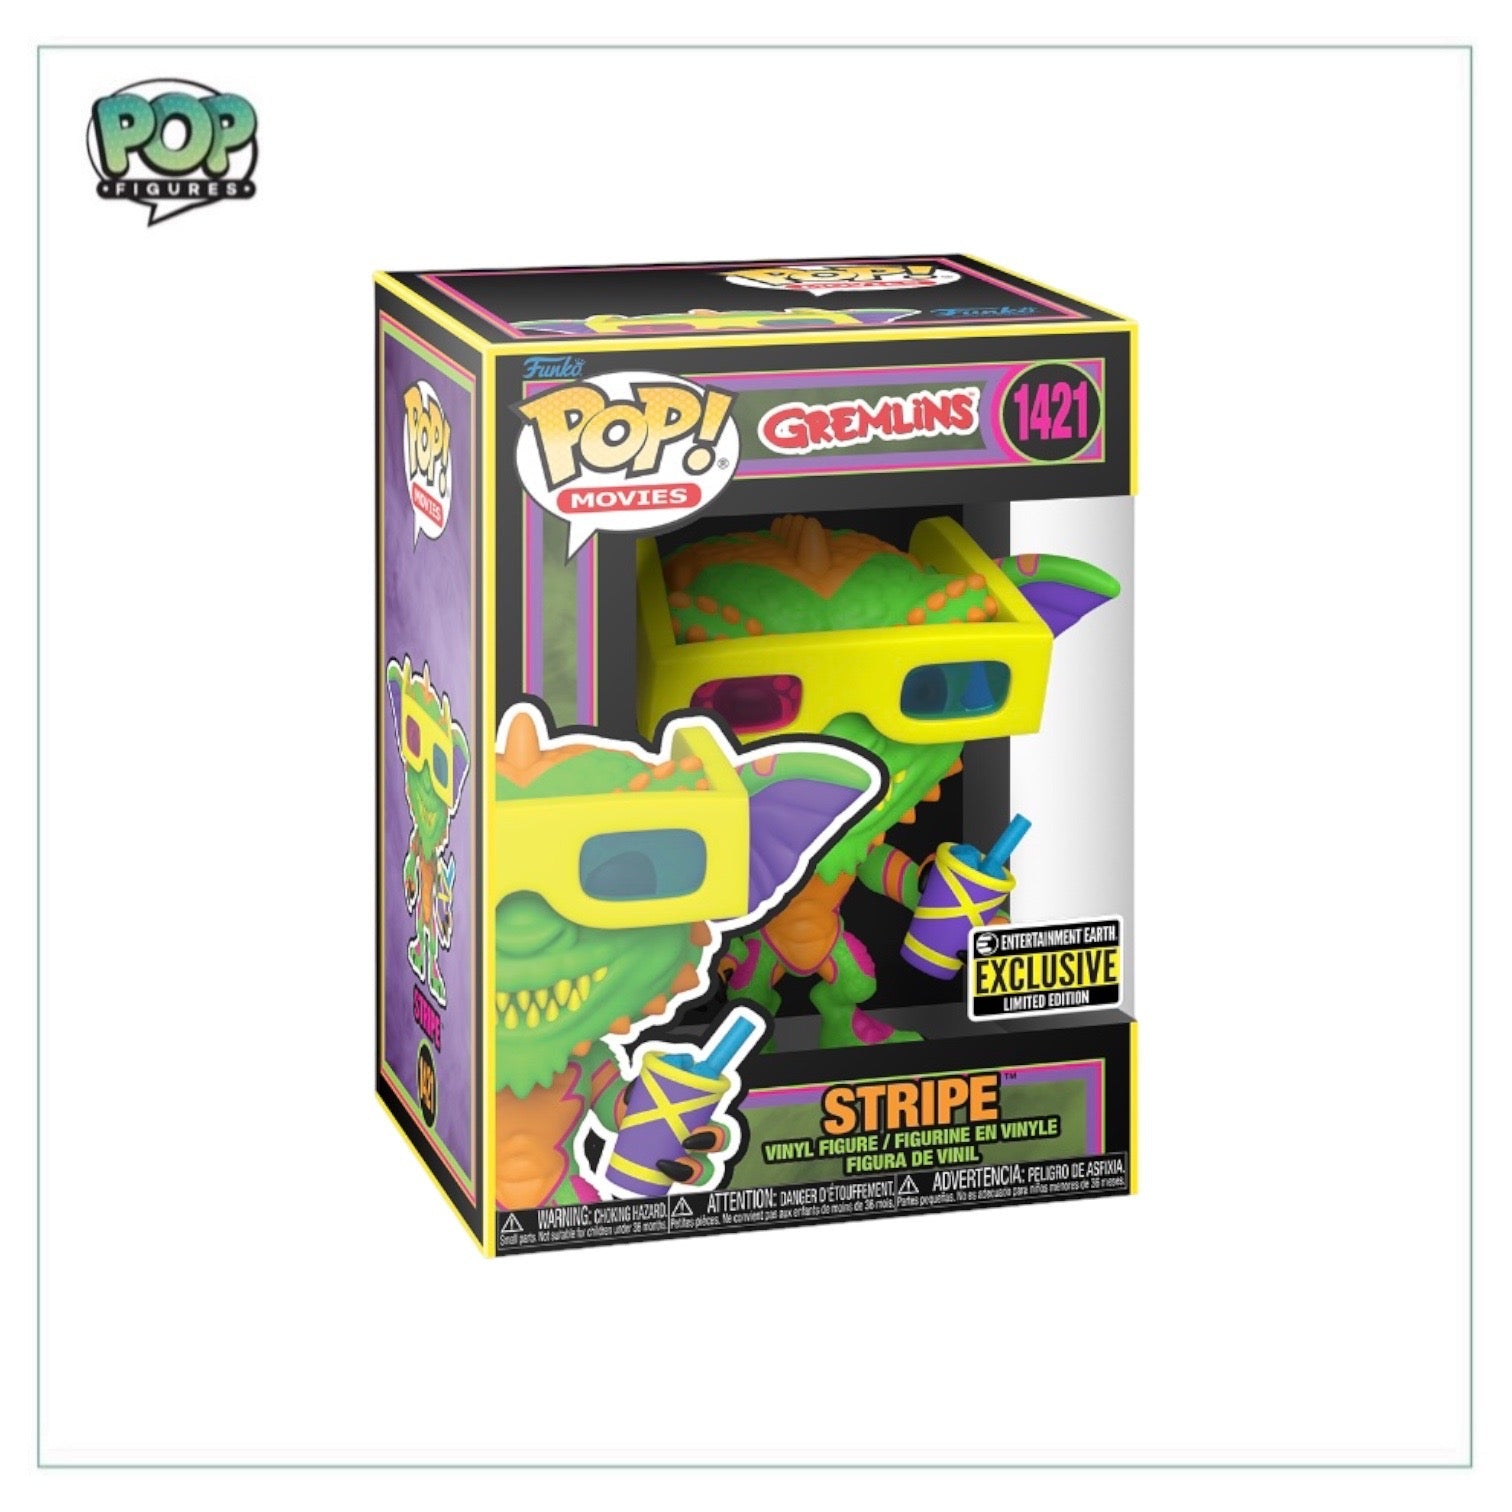 Stripe #1421 (Blacklight) Funko Pop! - Gremlins - Entertainment Earth Exclusive - Angry Cat